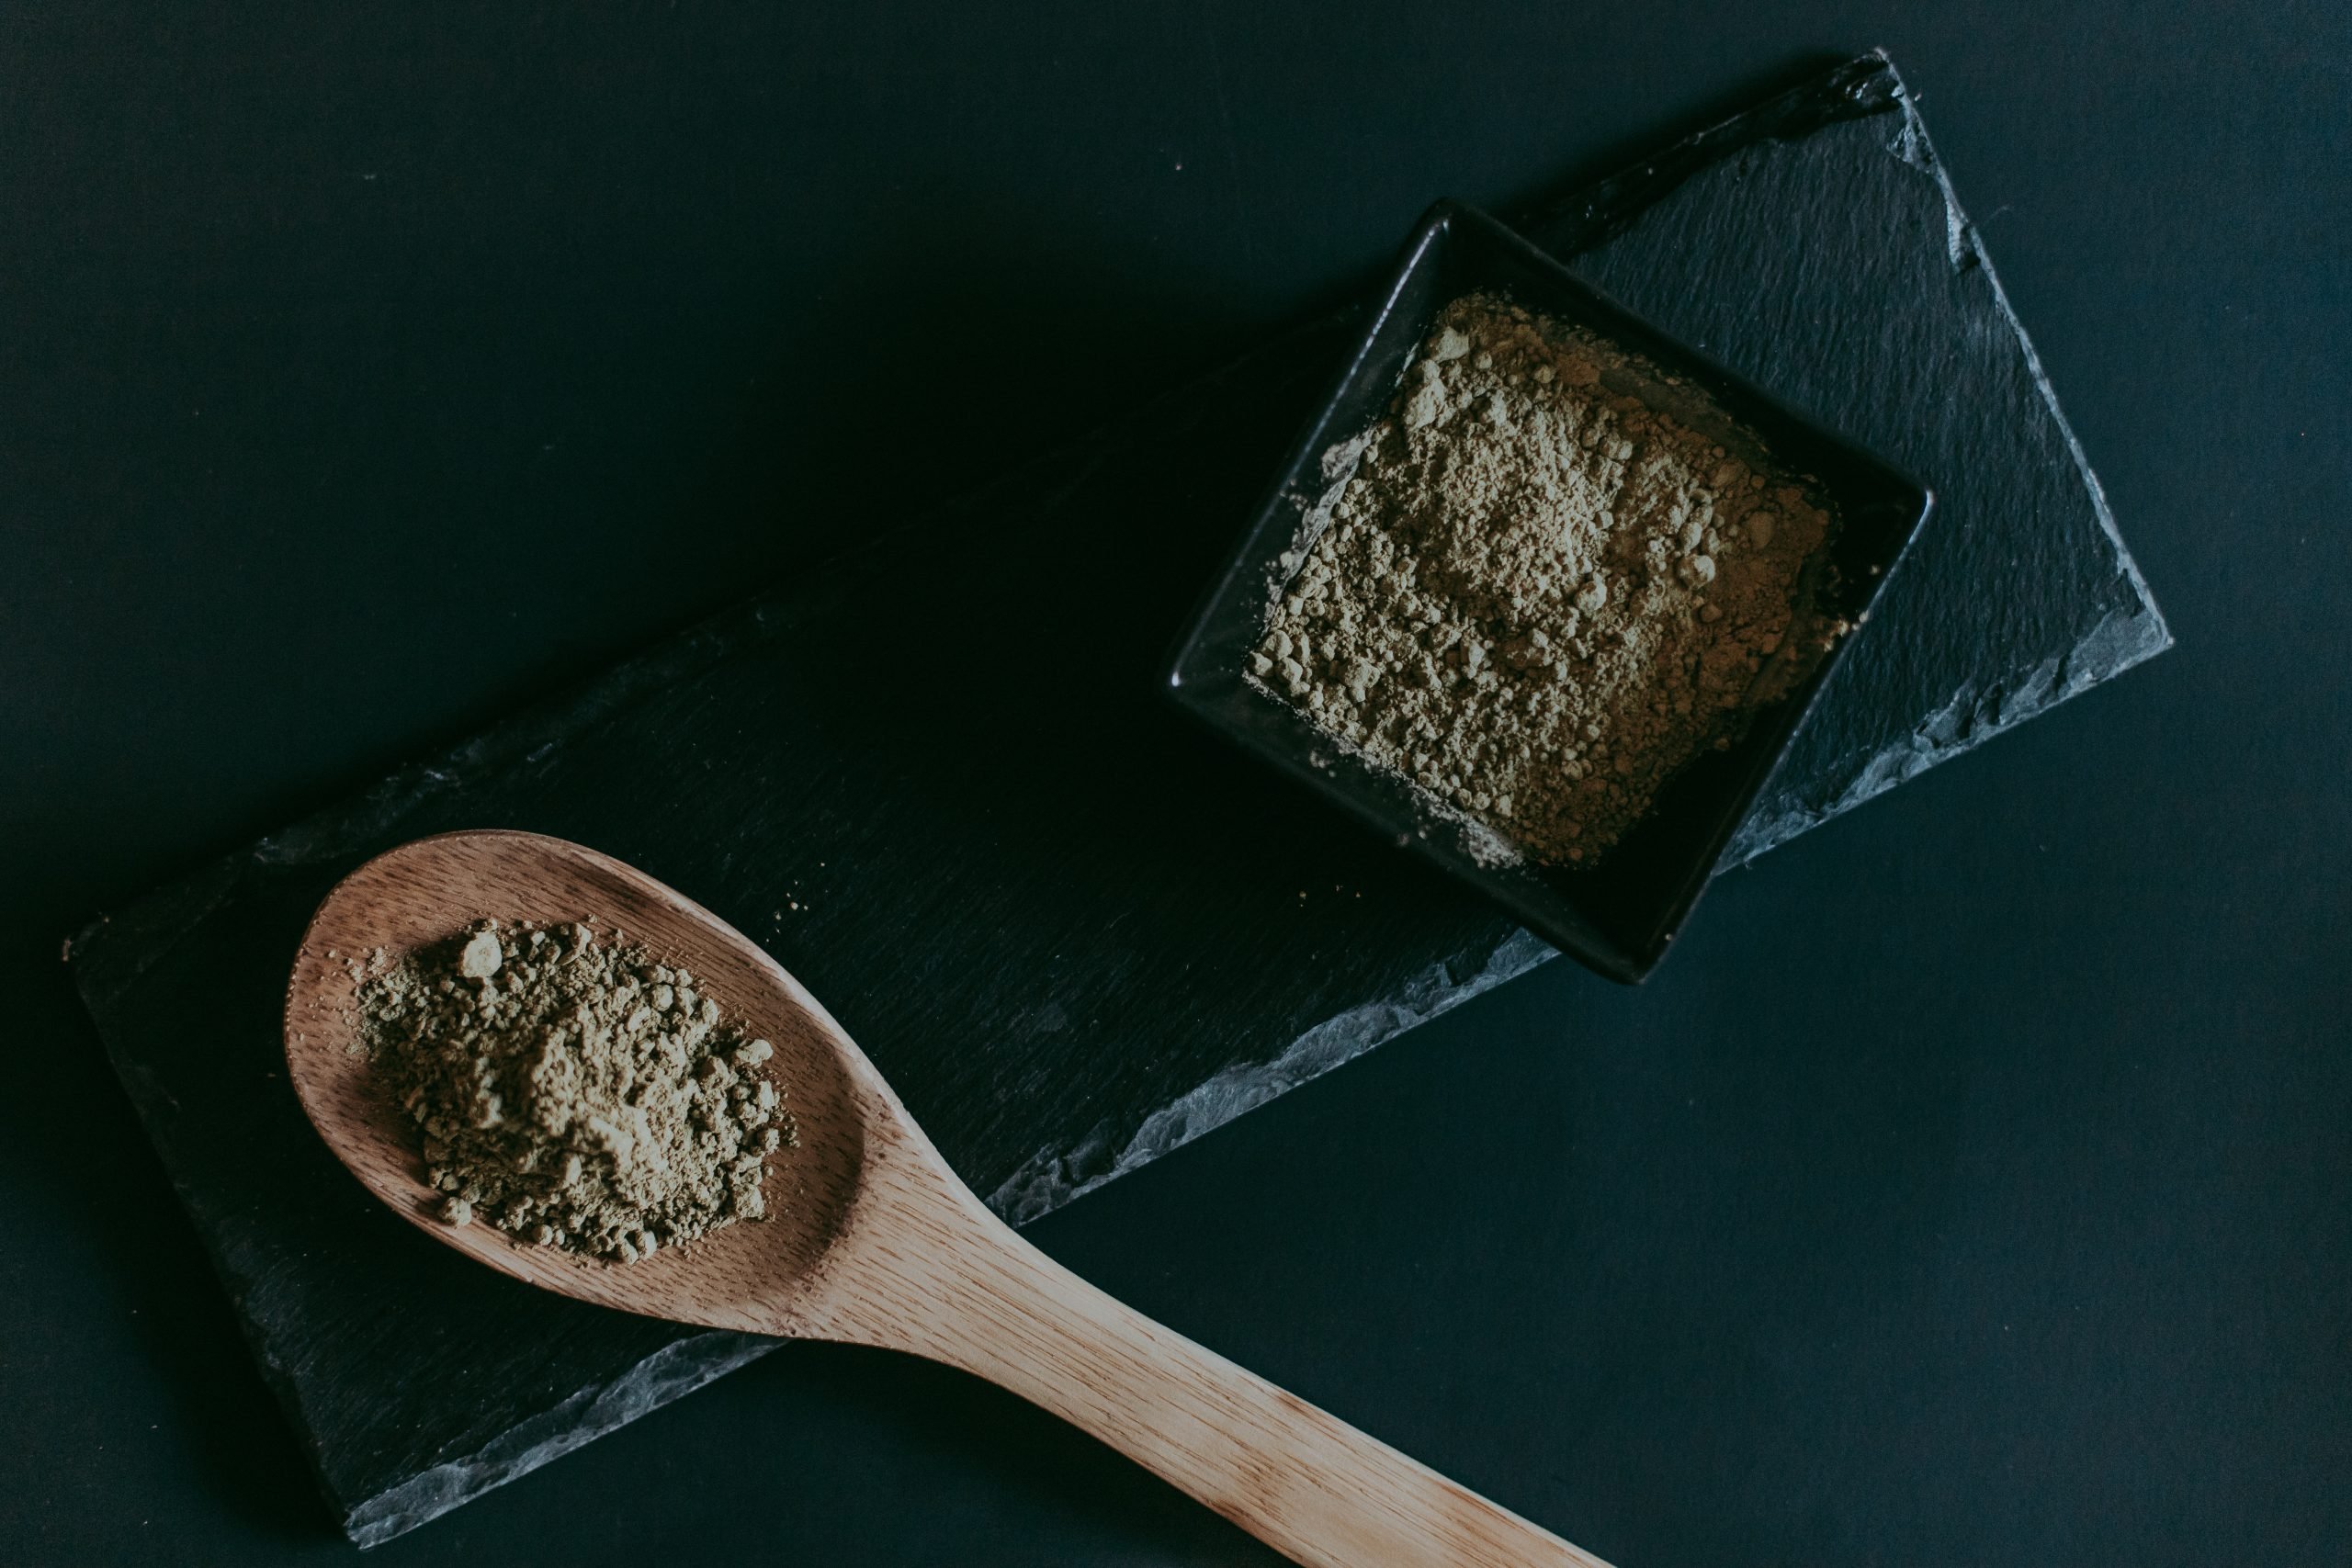 Kratom: What is it, is it safe and could it help?